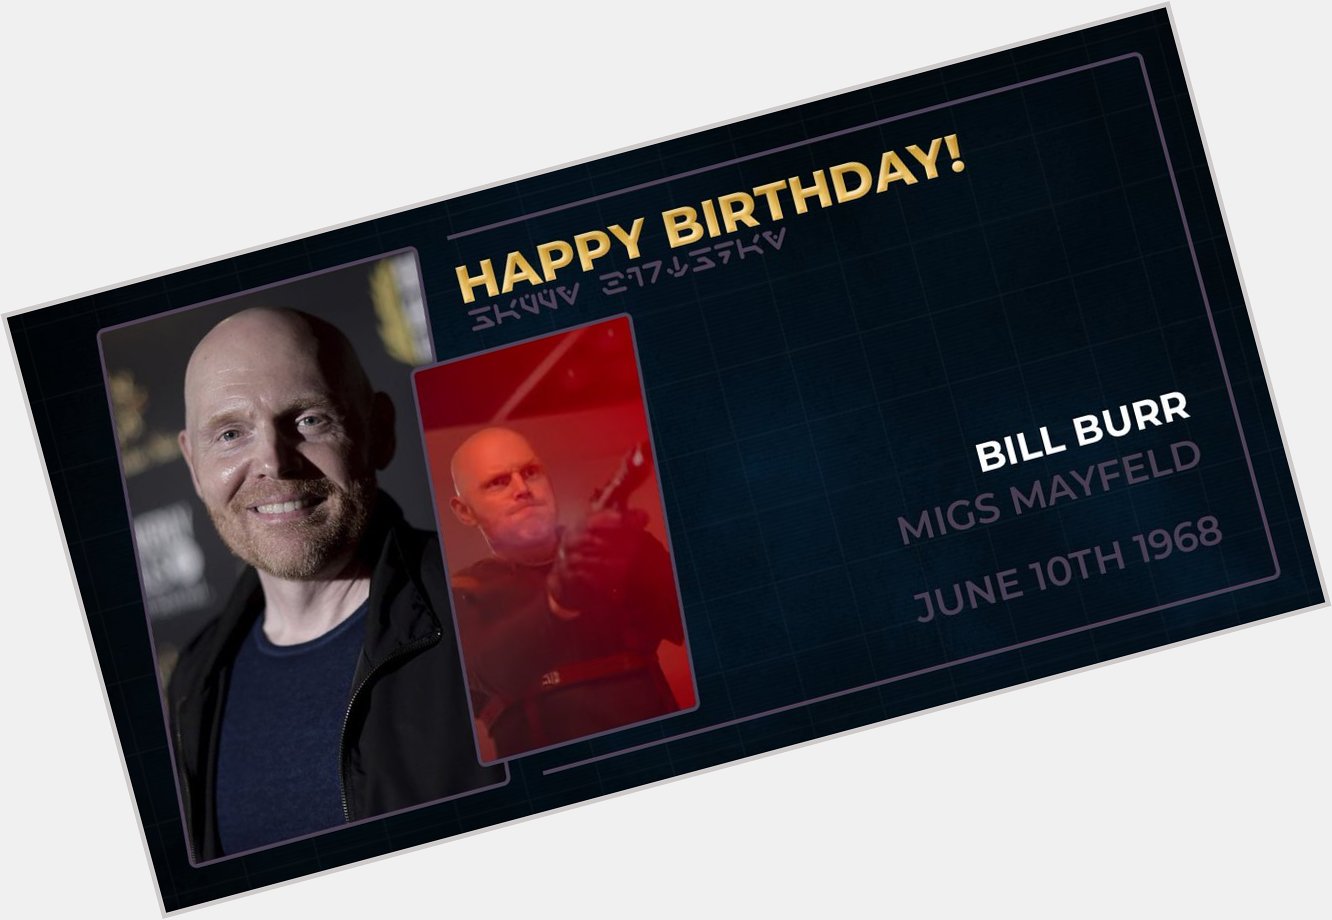 Happy birthday to Bill Burr, who played Migs Mayfeld in The Mandalorian!   